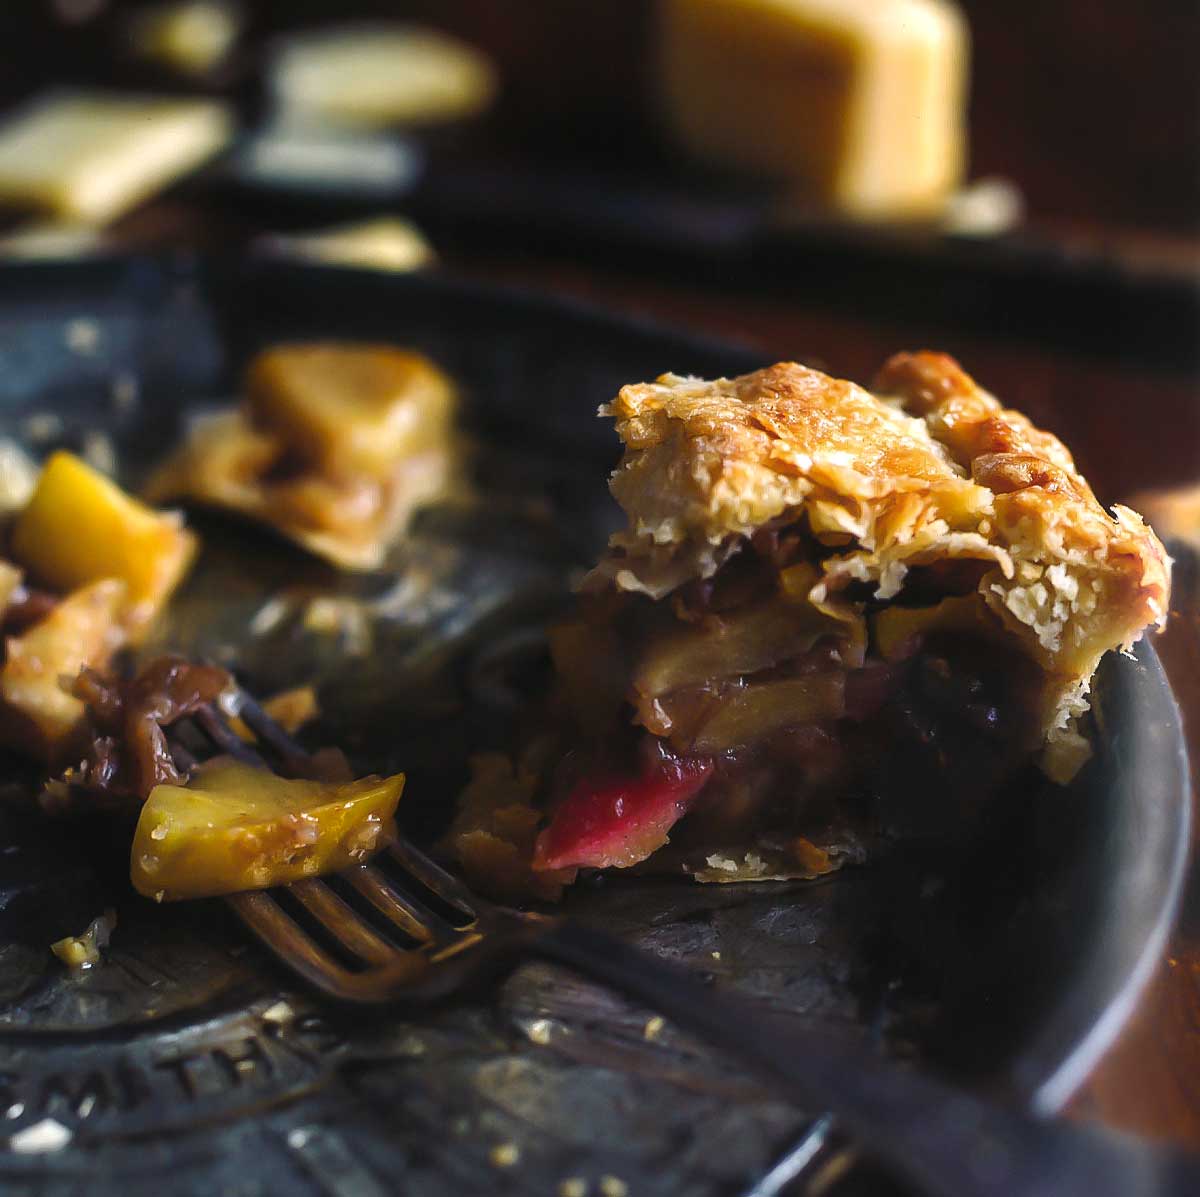 A small piece of apple pie in an almost empty pie plate with a fork and a few pieces of apple scattered around.